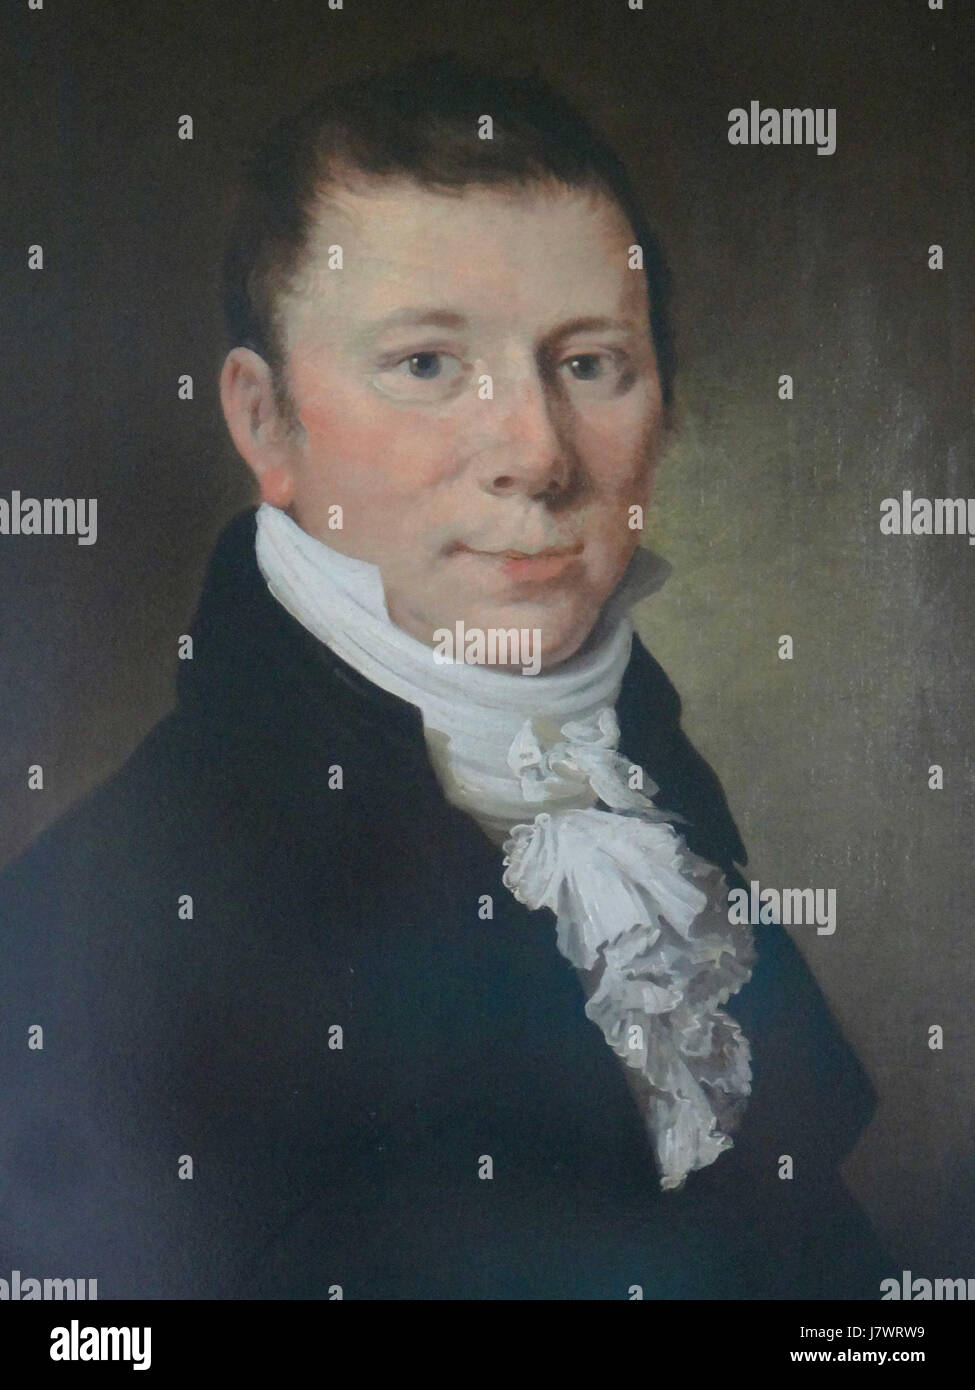 20150522 Anthony Christiaan Winand Staring (17671840) porte Adriaan de Lelie (17551820) Banque D'Images